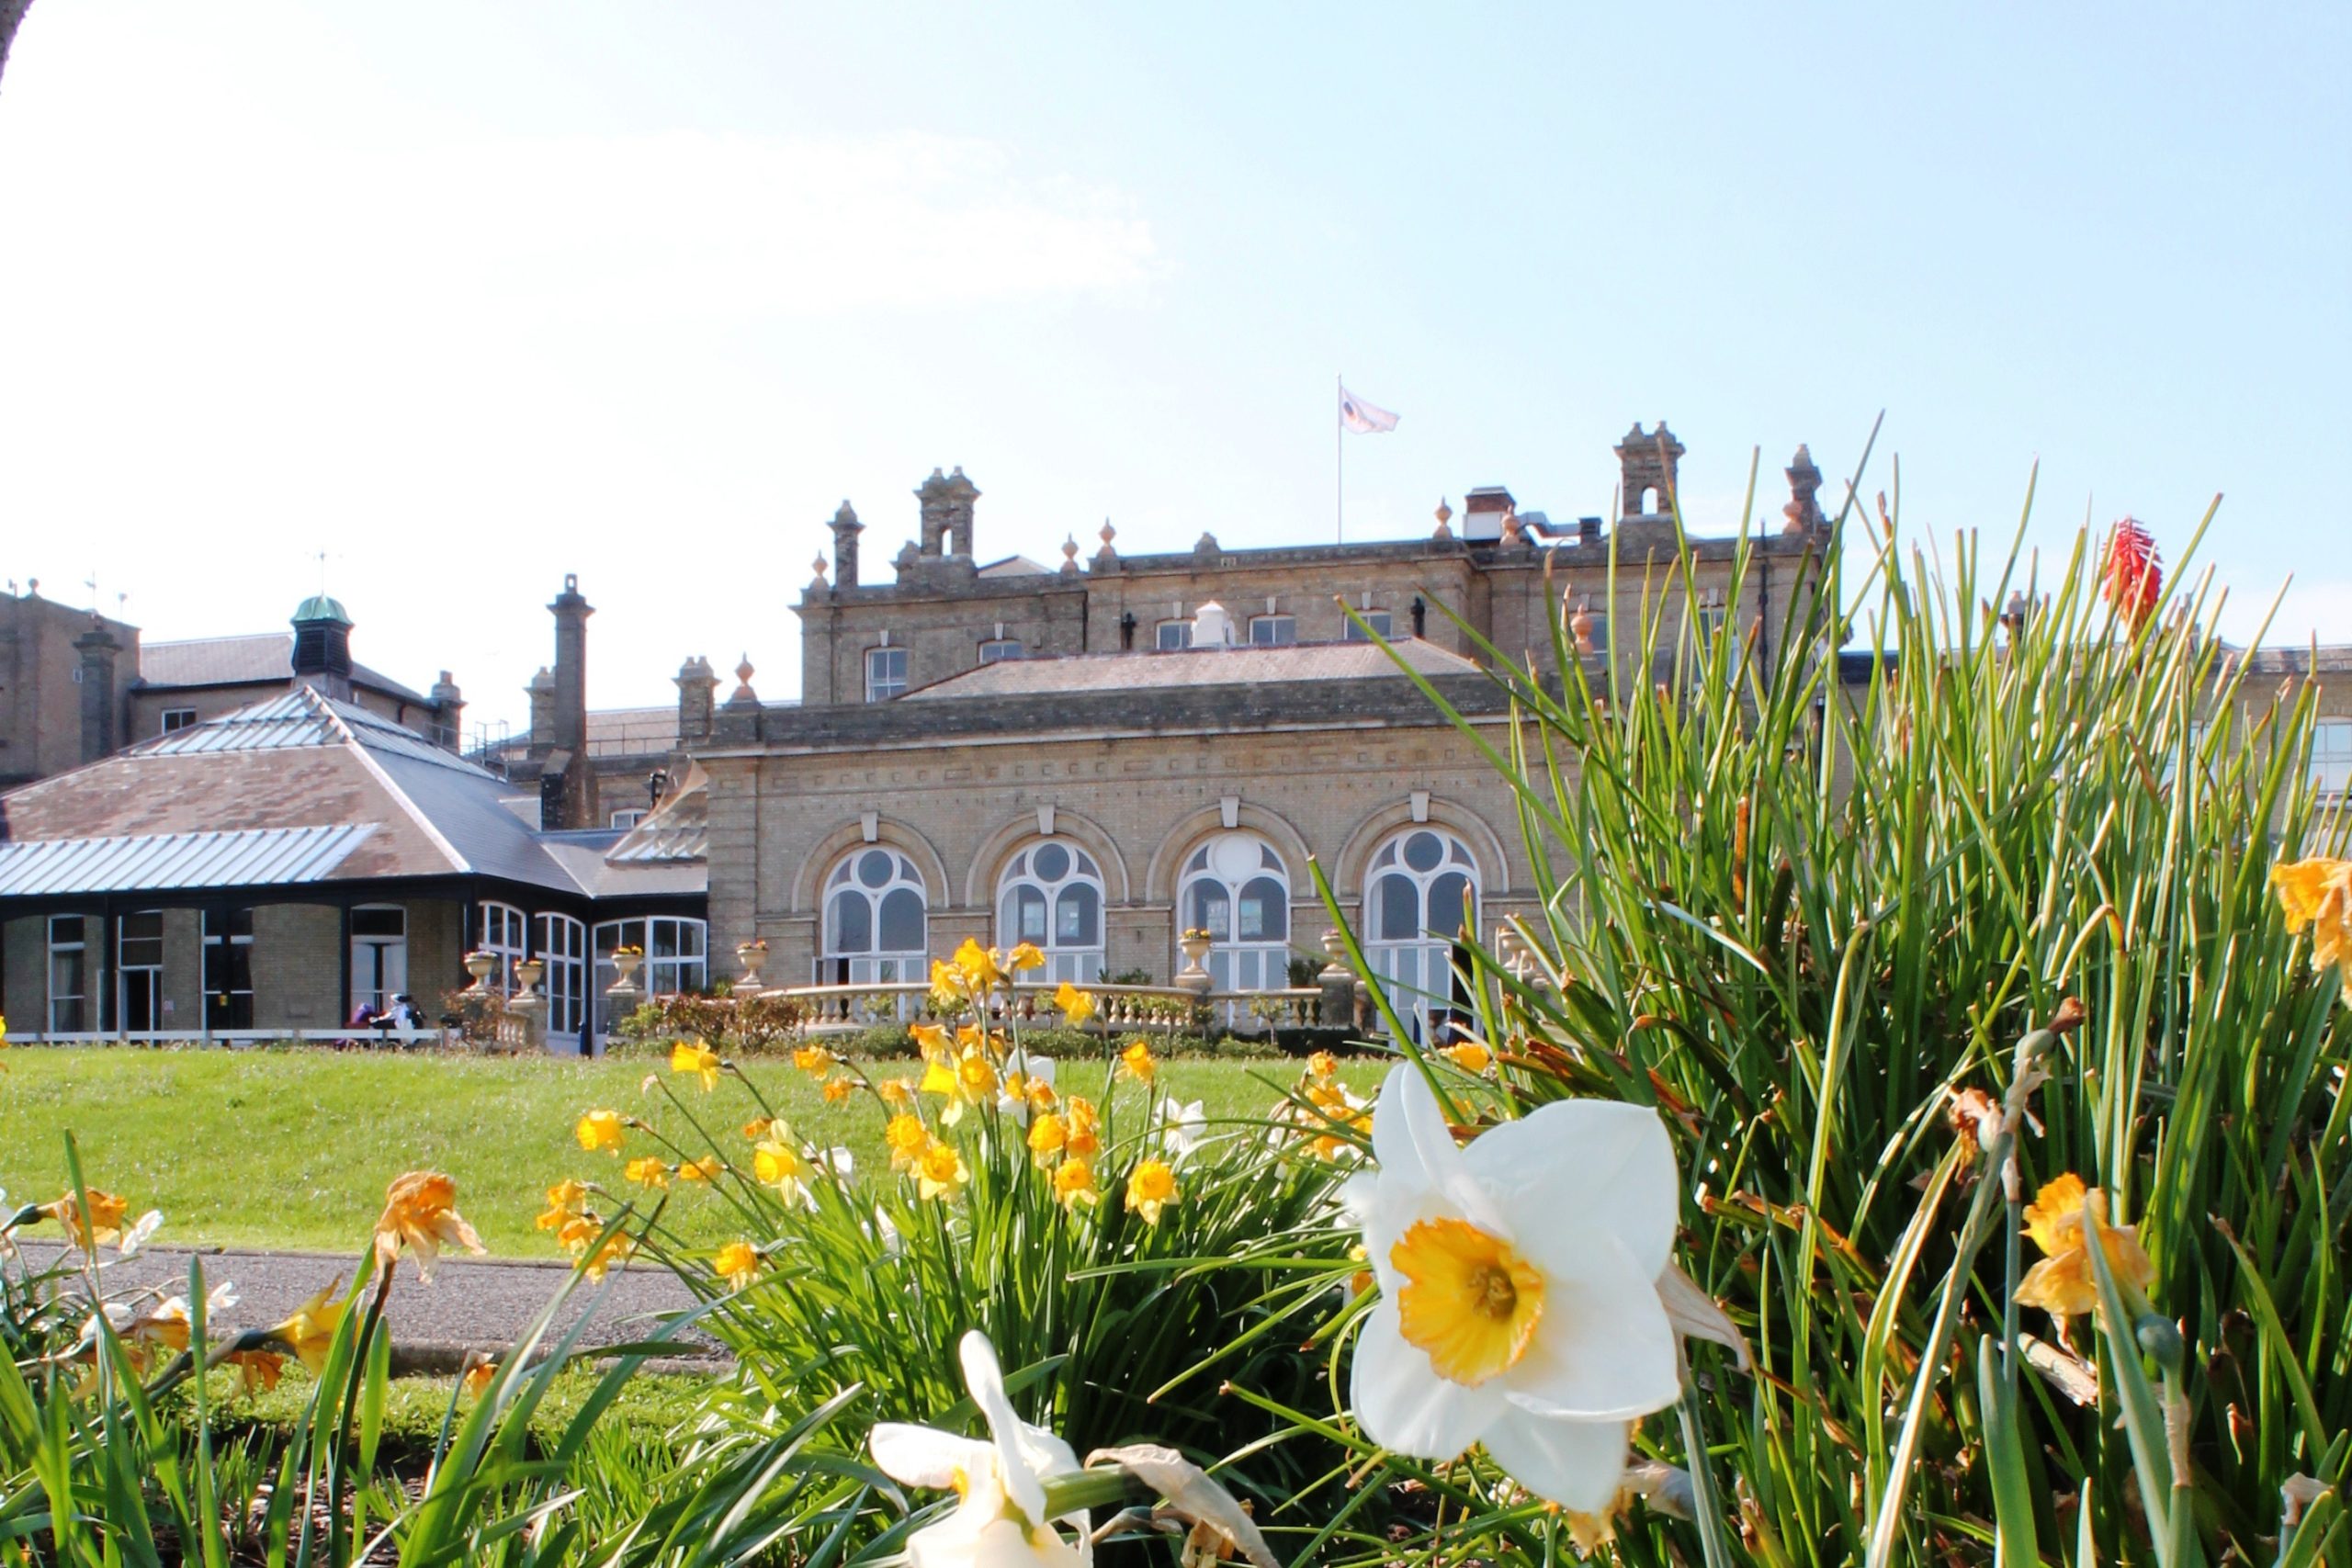 Photo of the Royal Hospital for Neuro-disability surrounded by daffodils